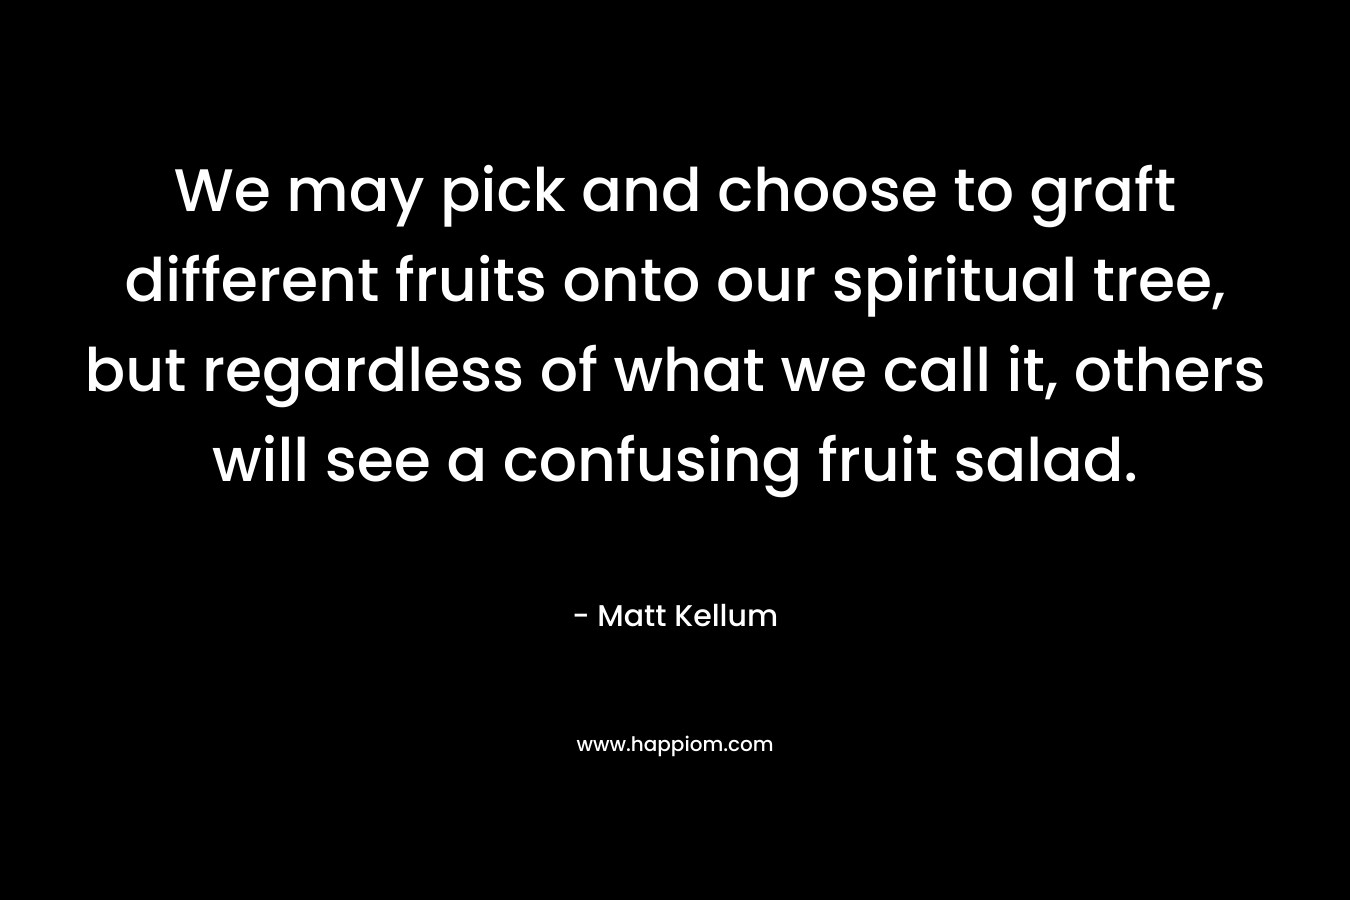 We may pick and choose to graft different fruits onto our spiritual tree, but regardless of what we call it, others will see a confusing fruit salad.